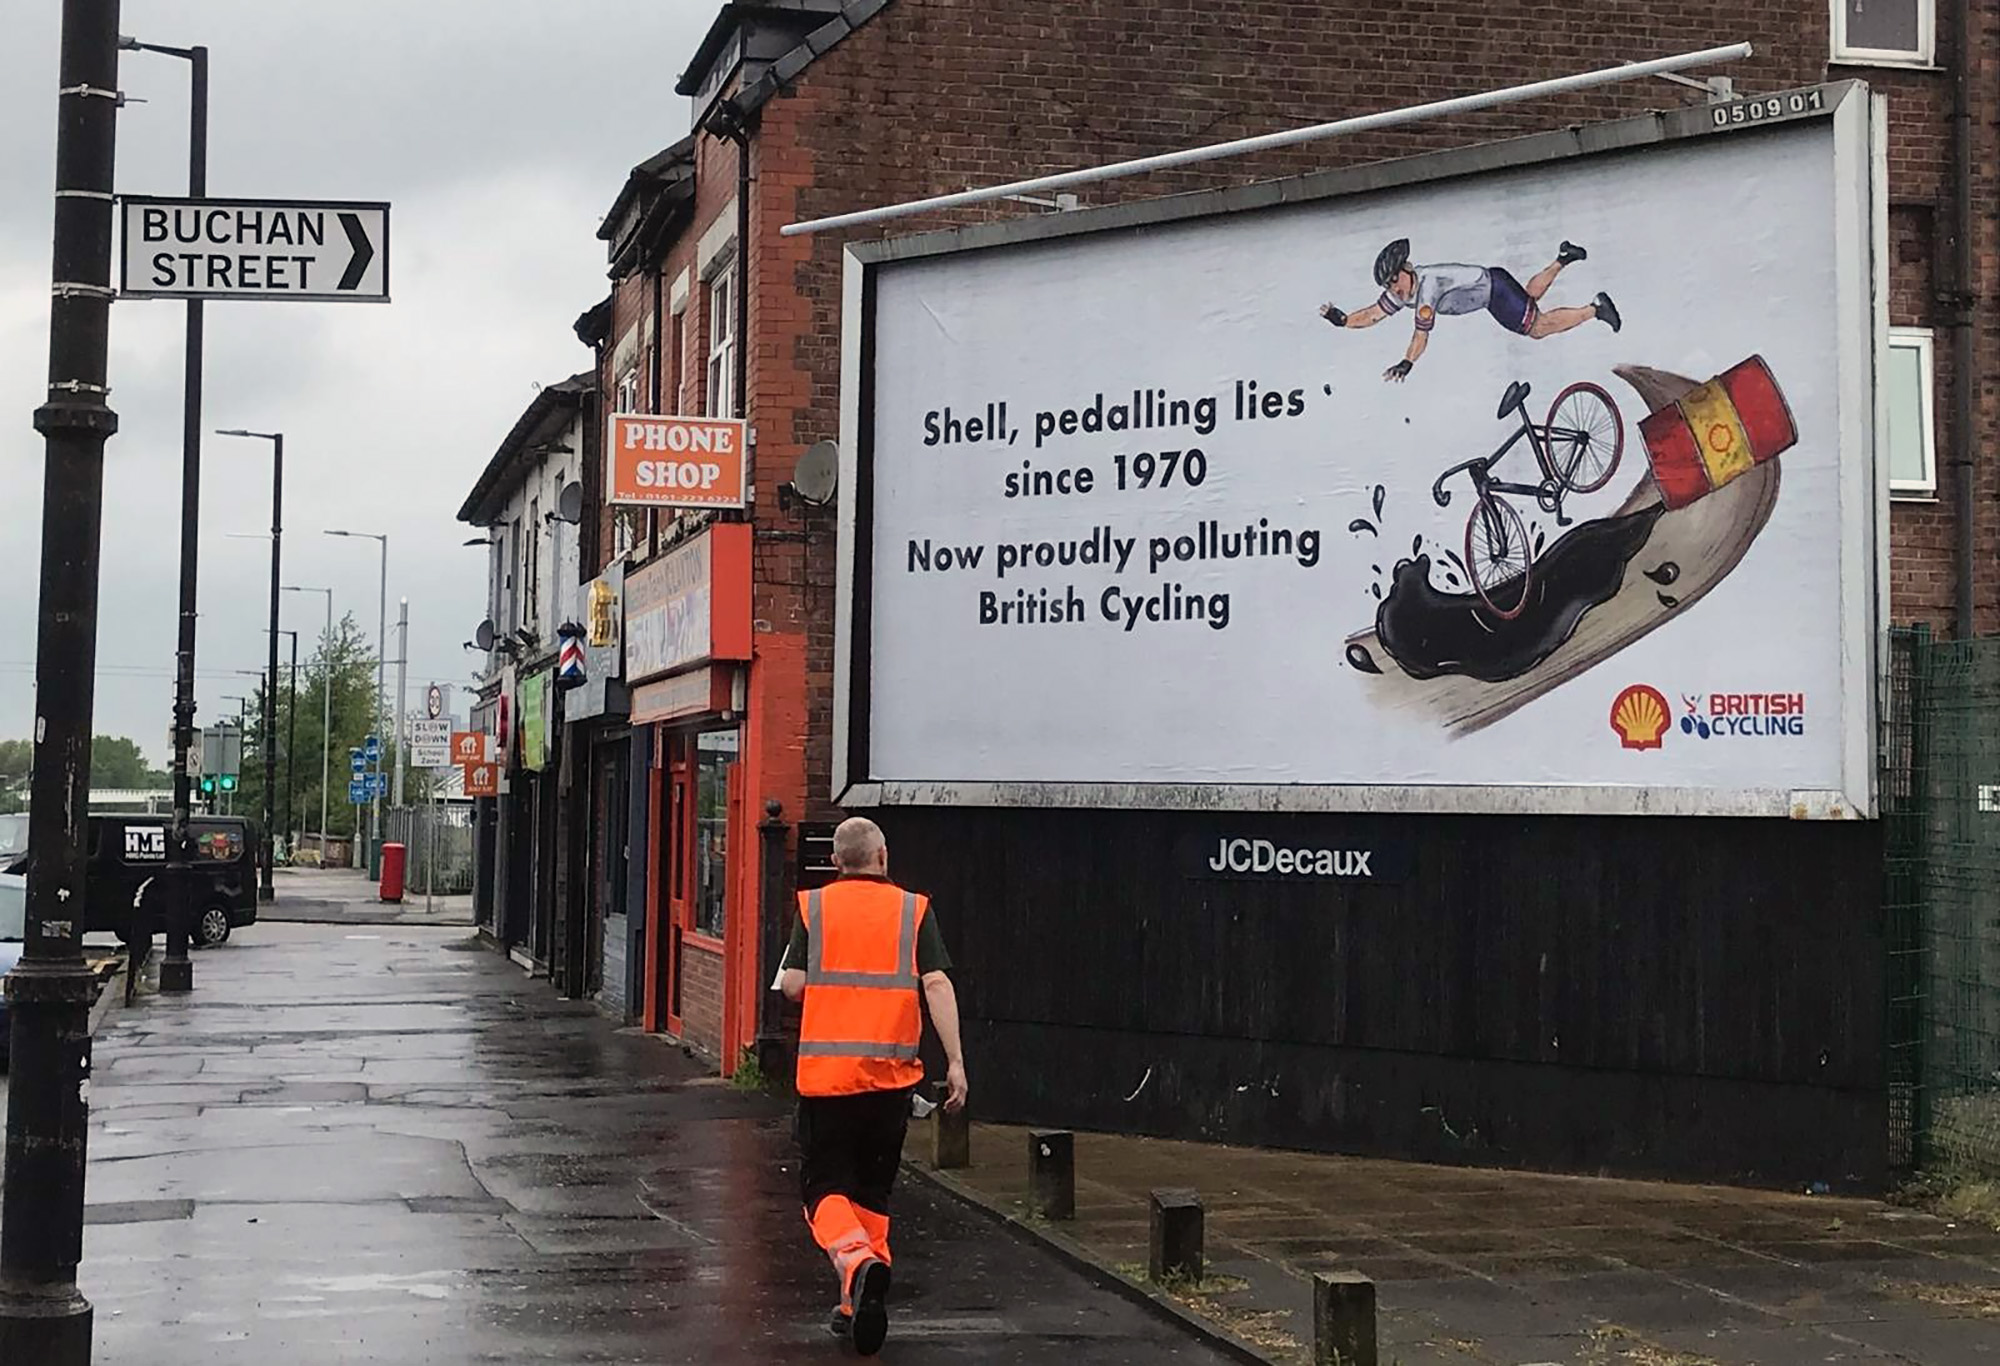 A billboard showing a poster protesting Shell and its sponsorship of British Cycling.